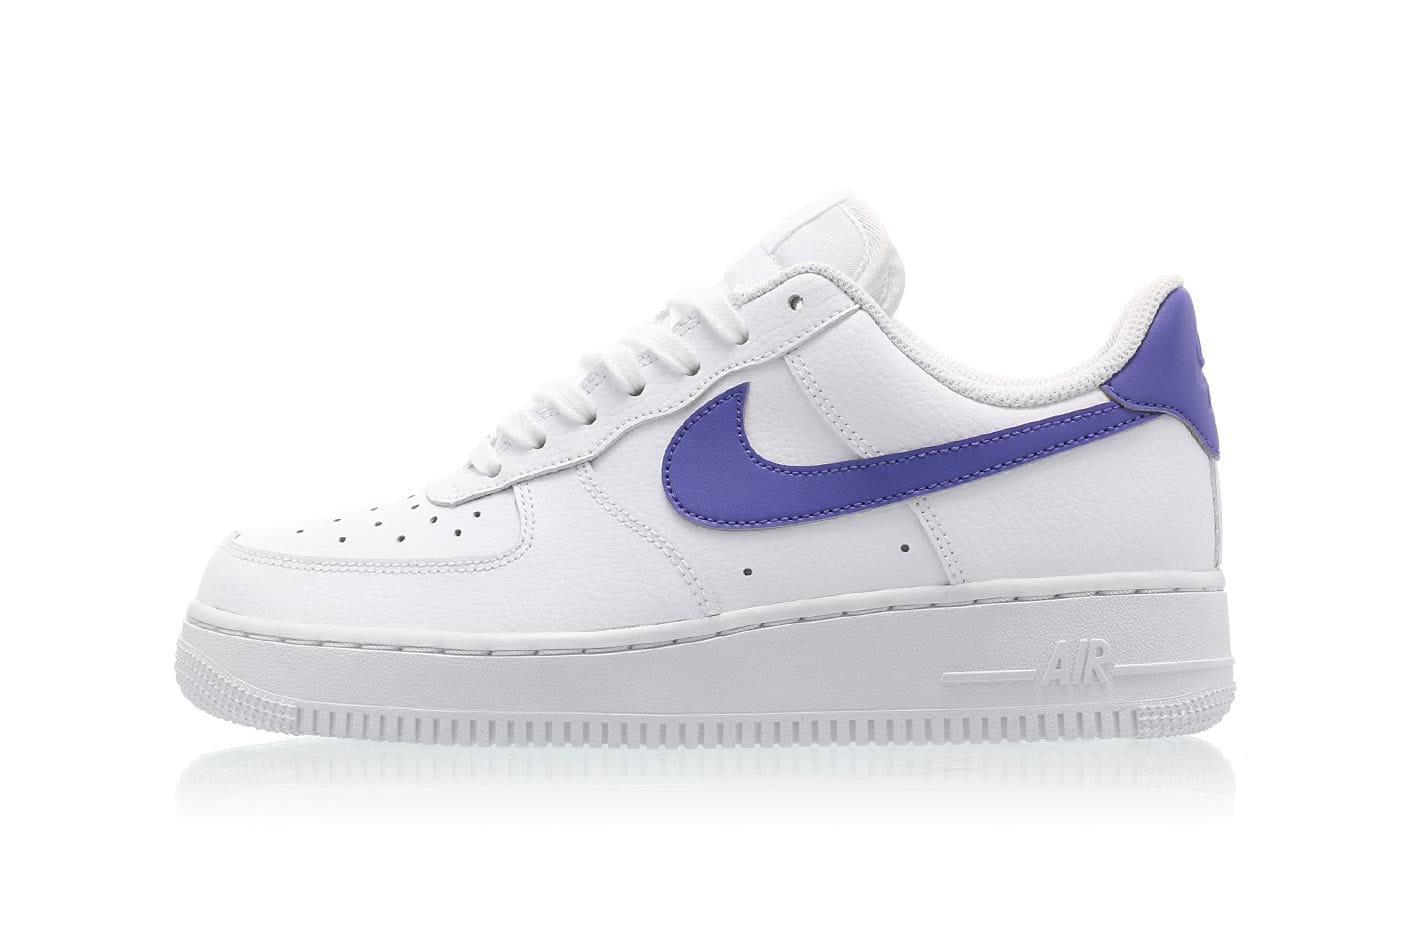 Nike Air Force 1 '07 in Ultra Violet and White | HYPEBAE